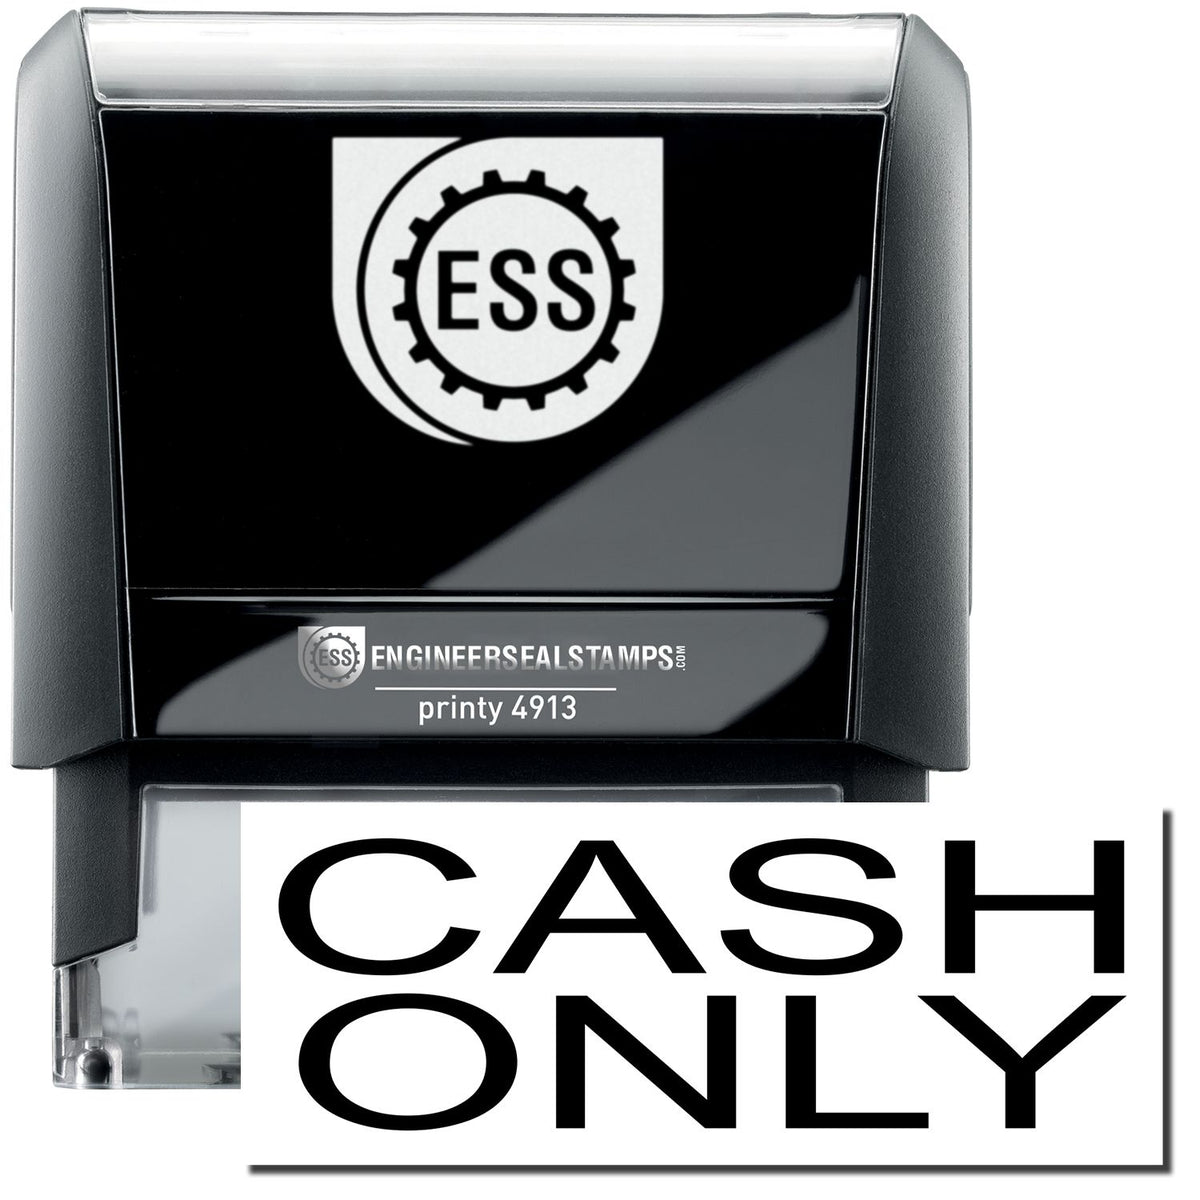 A self-inking stamp with a stamped image showing how the text &quot;CASH ONLY&quot; in a large bold font is displayed by it.